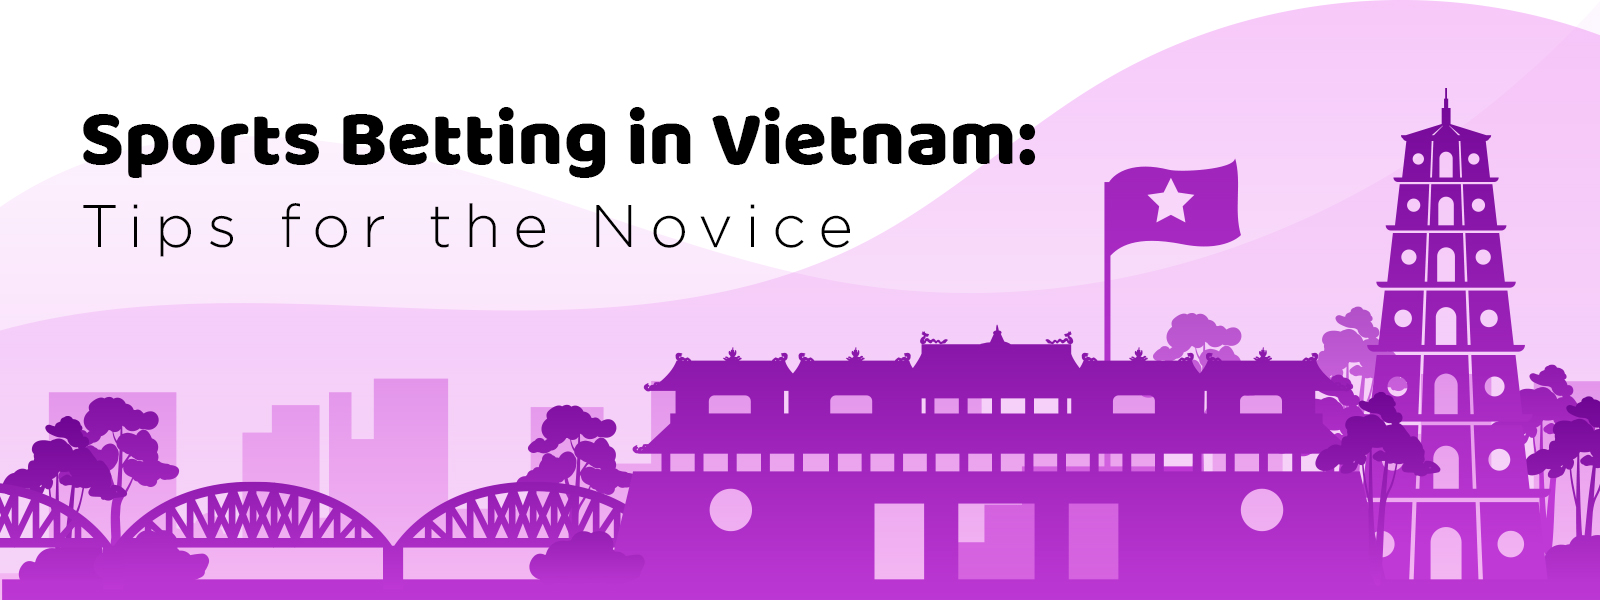 Does Your Vietnam betting sites Goals Match Your Practices?